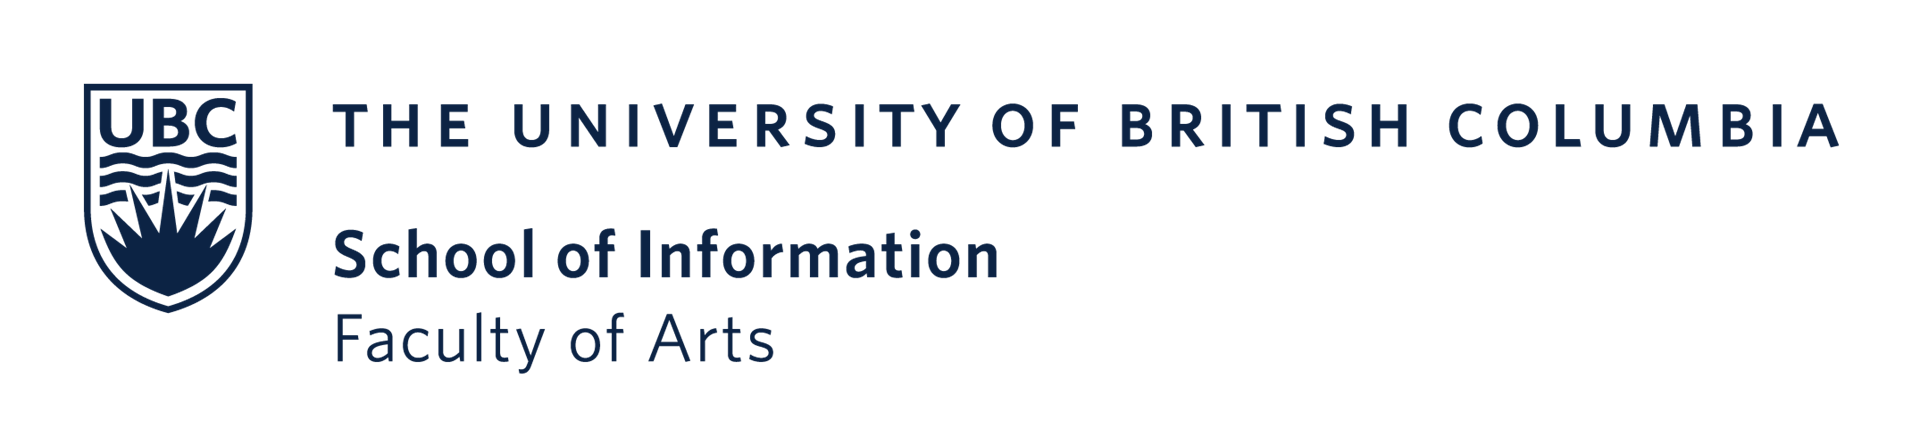 The University of British Columbia School of Information Faculty of Arts Logo